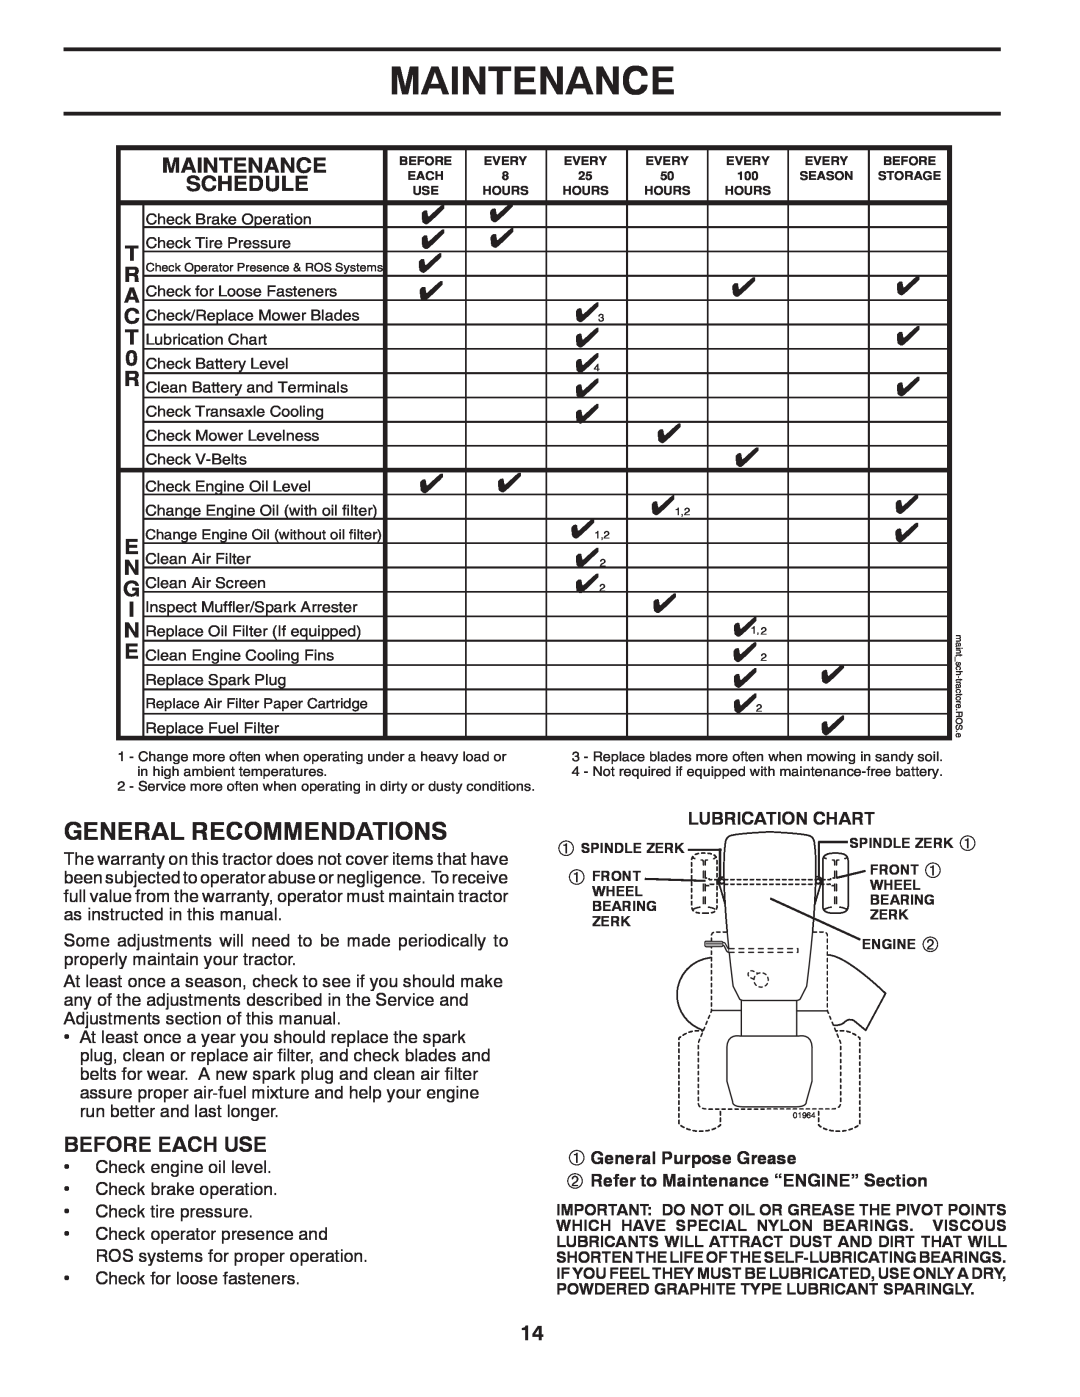 Husqvarna 96043005200 manual Lubrication Chart, ➀ General Purpose Grease ➁ Refer to Maintenance “ENGINE” Section 